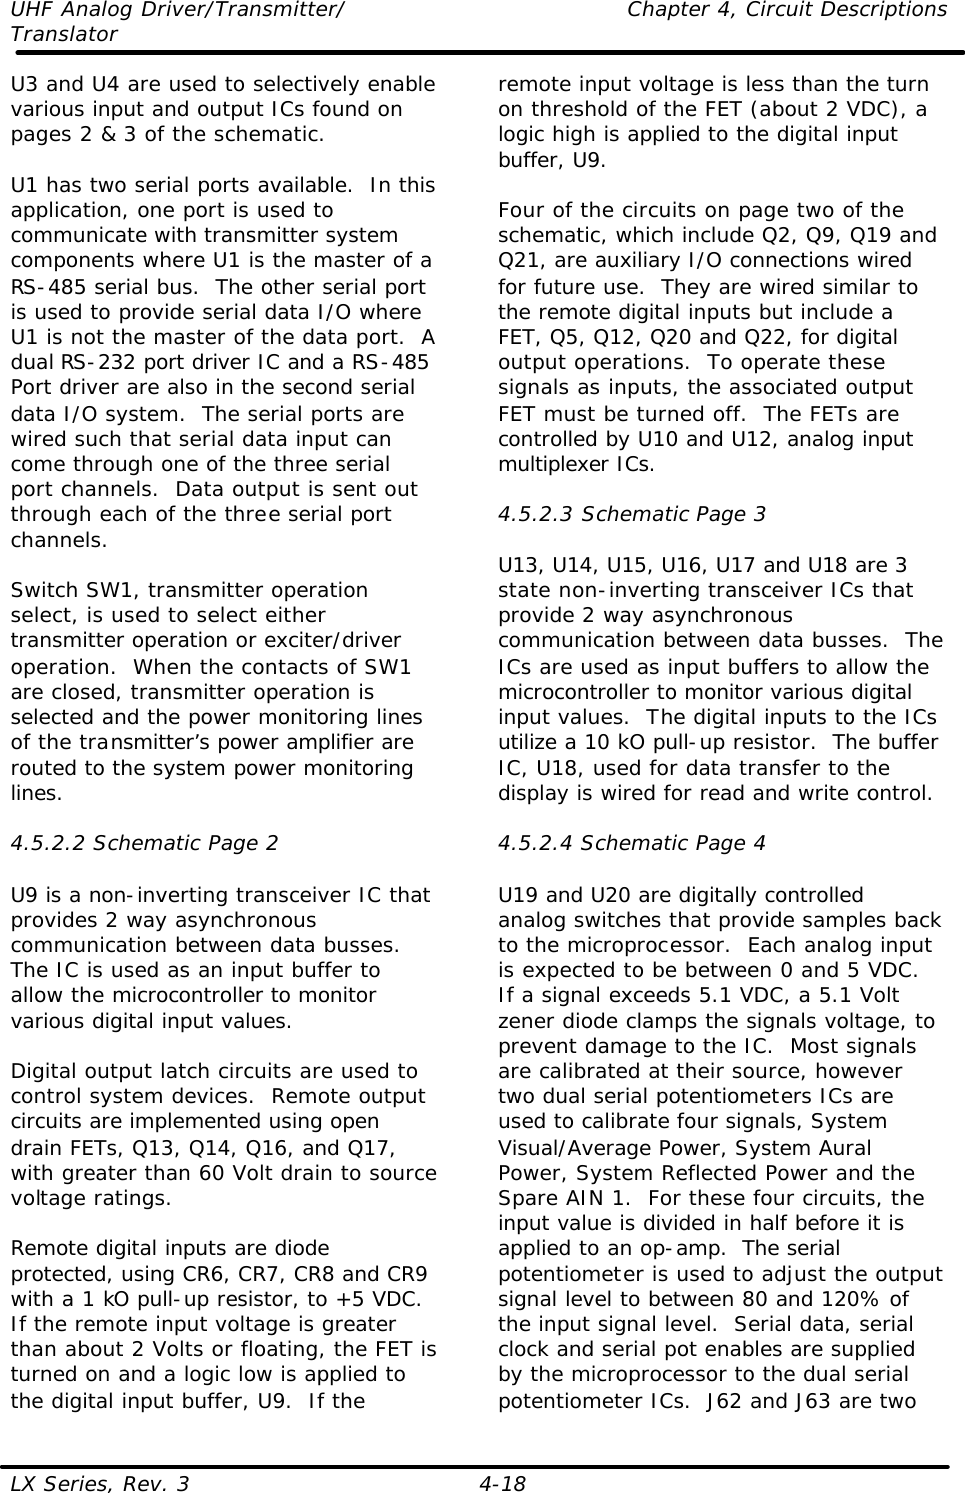 UHF Analog Driver/Transmitter/    Chapter 4, Circuit Descriptions Translator LX Series, Rev. 3    4-18 U3 and U4 are used to selectively enable various input and output ICs found on pages 2 &amp; 3 of the schematic.  U1 has two serial ports available.  In this application, one port is used to communicate with transmitter system components where U1 is the master of a RS-485 serial bus.  The other serial port is used to provide serial data I/O where U1 is not the master of the data port.  A dual RS-232 port driver IC and a RS-485 Port driver are also in the second serial data I/O system.  The serial ports are wired such that serial data input can come through one of the three serial port channels.  Data output is sent out through each of the three serial port channels.  Switch SW1, transmitter operation select, is used to select either transmitter operation or exciter/driver operation.  When the contacts of SW1 are closed, transmitter operation is selected and the power monitoring lines of the transmitter’s power amplifier are routed to the system power monitoring lines.  4.5.2.2 Schematic Page 2  U9 is a non-inverting transceiver IC that provides 2 way asynchronous communication between data busses.  The IC is used as an input buffer to allow the microcontroller to monitor various digital input values.  Digital output latch circuits are used to control system devices.  Remote output circuits are implemented using open drain FETs, Q13, Q14, Q16, and Q17, with greater than 60 Volt drain to source voltage ratings.  Remote digital inputs are diode protected, using CR6, CR7, CR8 and CR9 with a 1 kO pull-up resistor, to +5 VDC.  If the remote input voltage is greater than about 2 Volts or floating, the FET is turned on and a logic low is applied to the digital input buffer, U9.  If the remote input voltage is less than the turn on threshold of the FET (about 2 VDC), a logic high is applied to the digital input buffer, U9.  Four of the circuits on page two of the schematic, which include Q2, Q9, Q19 and Q21, are auxiliary I/O connections wired for future use.  They are wired similar to the remote digital inputs but include a FET, Q5, Q12, Q20 and Q22, for digital output operations.  To operate these signals as inputs, the associated output FET must be turned off.  The FETs are controlled by U10 and U12, analog input multiplexer ICs.  4.5.2.3 Schematic Page 3  U13, U14, U15, U16, U17 and U18 are 3 state non-inverting transceiver ICs that provide 2 way asynchronous communication between data busses.  The ICs are used as input buffers to allow the microcontroller to monitor various digital input values.  The digital inputs to the ICs utilize a 10 kO pull-up resistor.  The buffer IC, U18, used for data transfer to the display is wired for read and write control.  4.5.2.4 Schematic Page 4  U19 and U20 are digitally controlled analog switches that provide samples back to the microprocessor.  Each analog input is expected to be between 0 and 5 VDC.  If a signal exceeds 5.1 VDC, a 5.1 Volt zener diode clamps the signals voltage, to prevent damage to the IC.  Most signals are calibrated at their source, however two dual serial potentiometers ICs are used to calibrate four signals, System Visual/Average Power, System Aural Power, System Reflected Power and the Spare AIN 1.  For these four circuits, the input value is divided in half before it is applied to an op-amp.  The serial potentiometer is used to adjust the output signal level to between 80 and 120% of the input signal level.  Serial data, serial clock and serial pot enables are supplied by the microprocessor to the dual serial potentiometer ICs.  J62 and J63 are two 